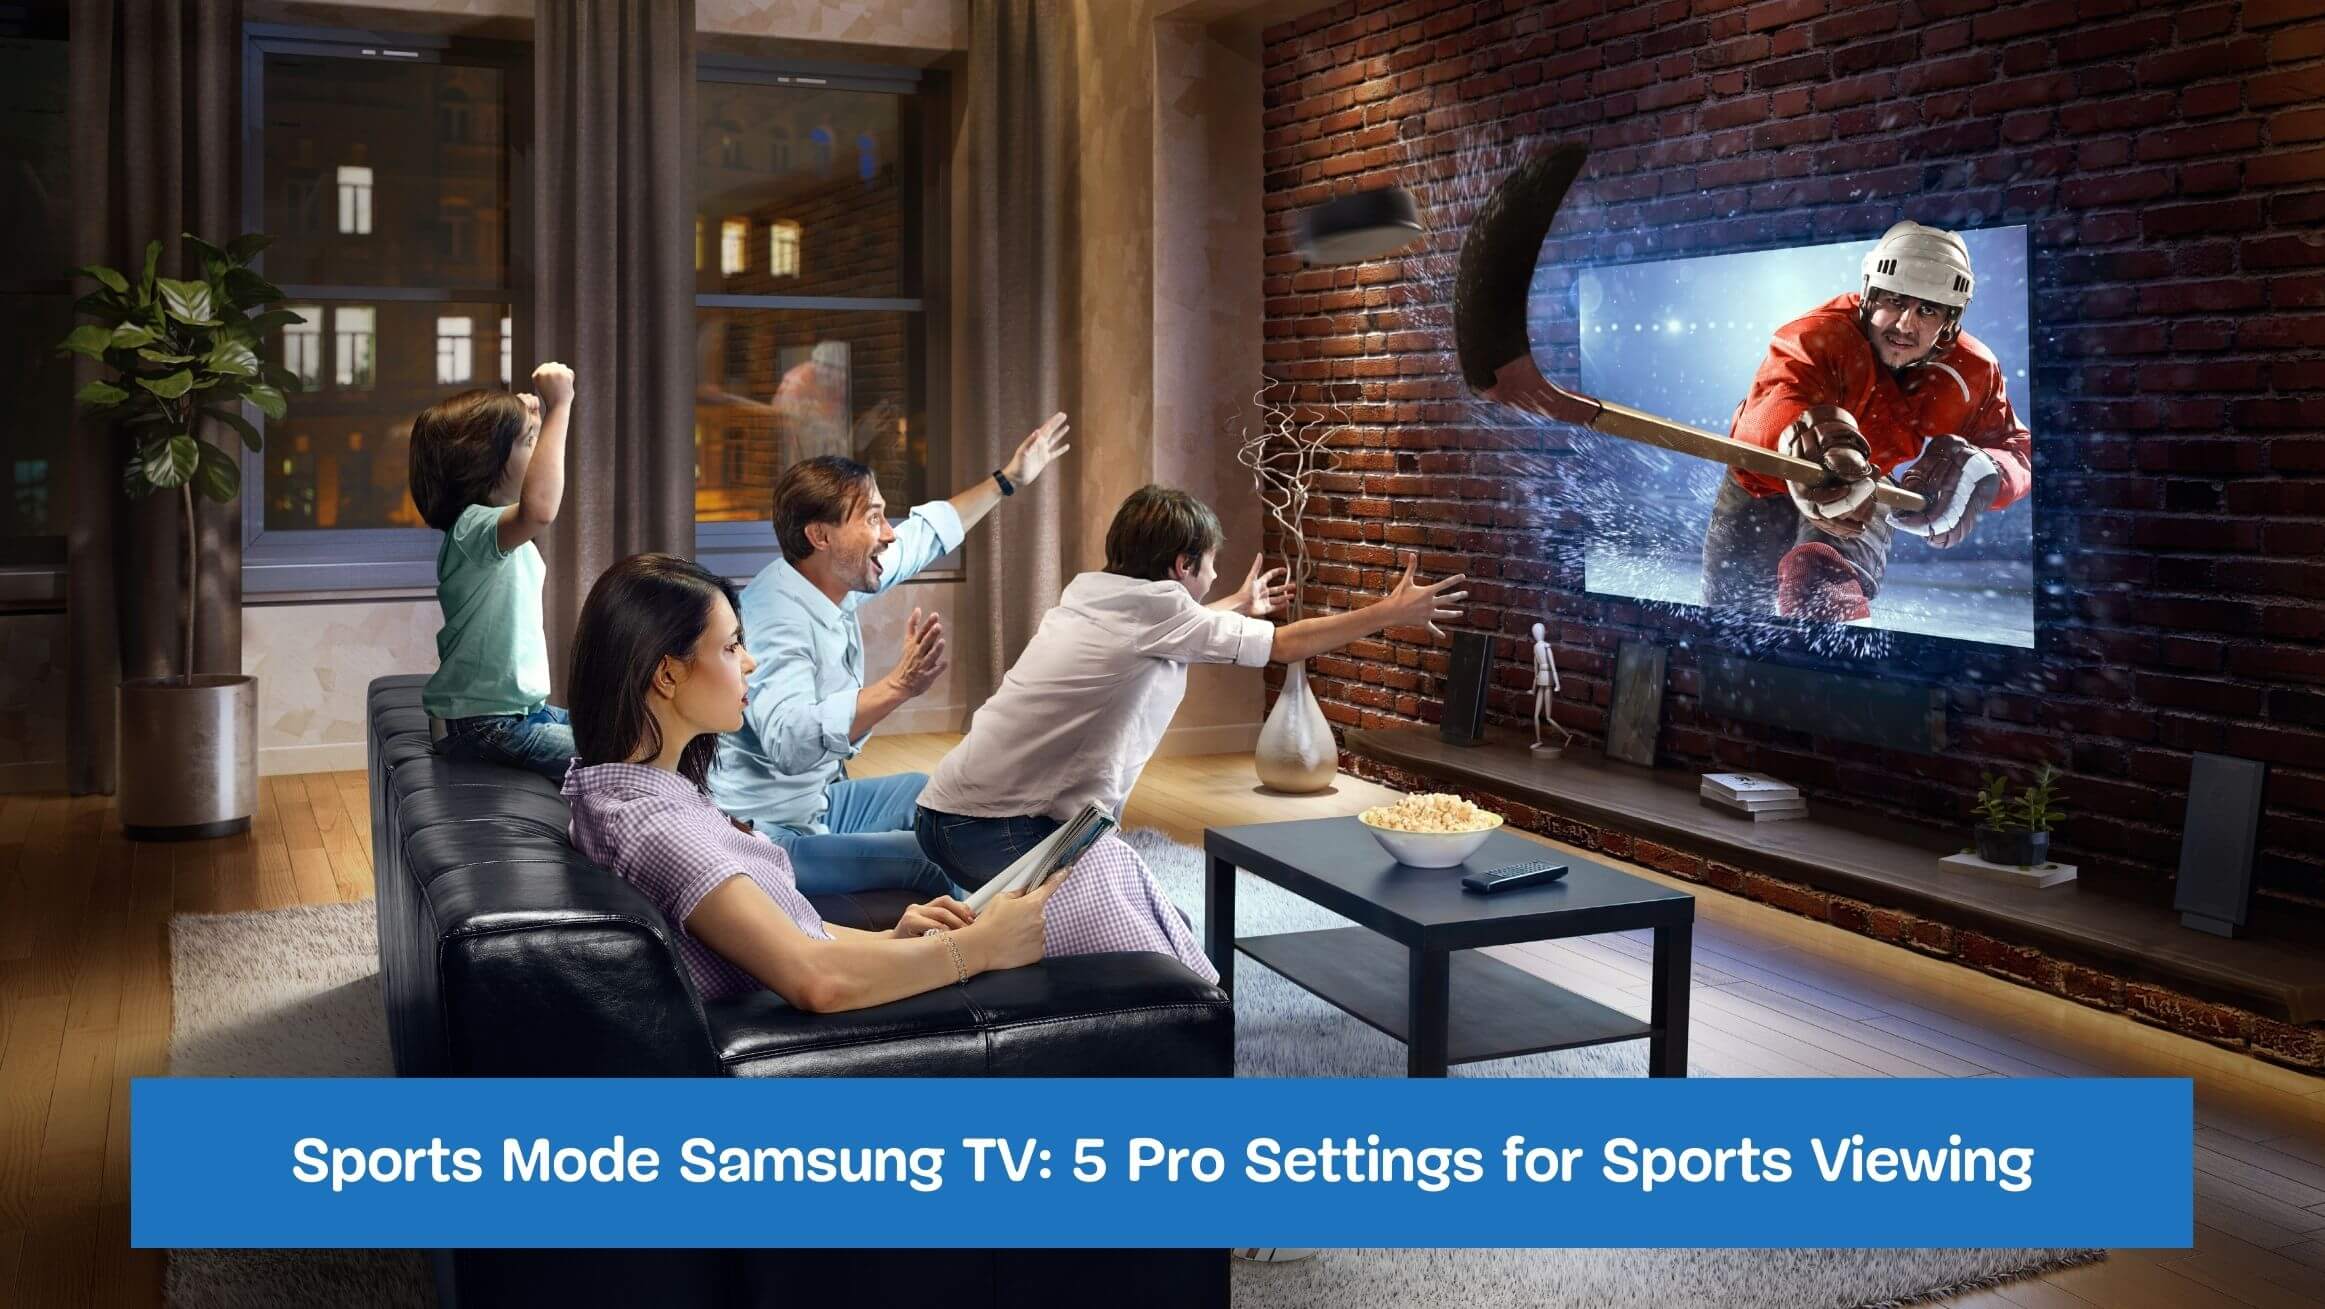 Sports Mode Samsung TV: 5 Pro Settings for Sports Viewing